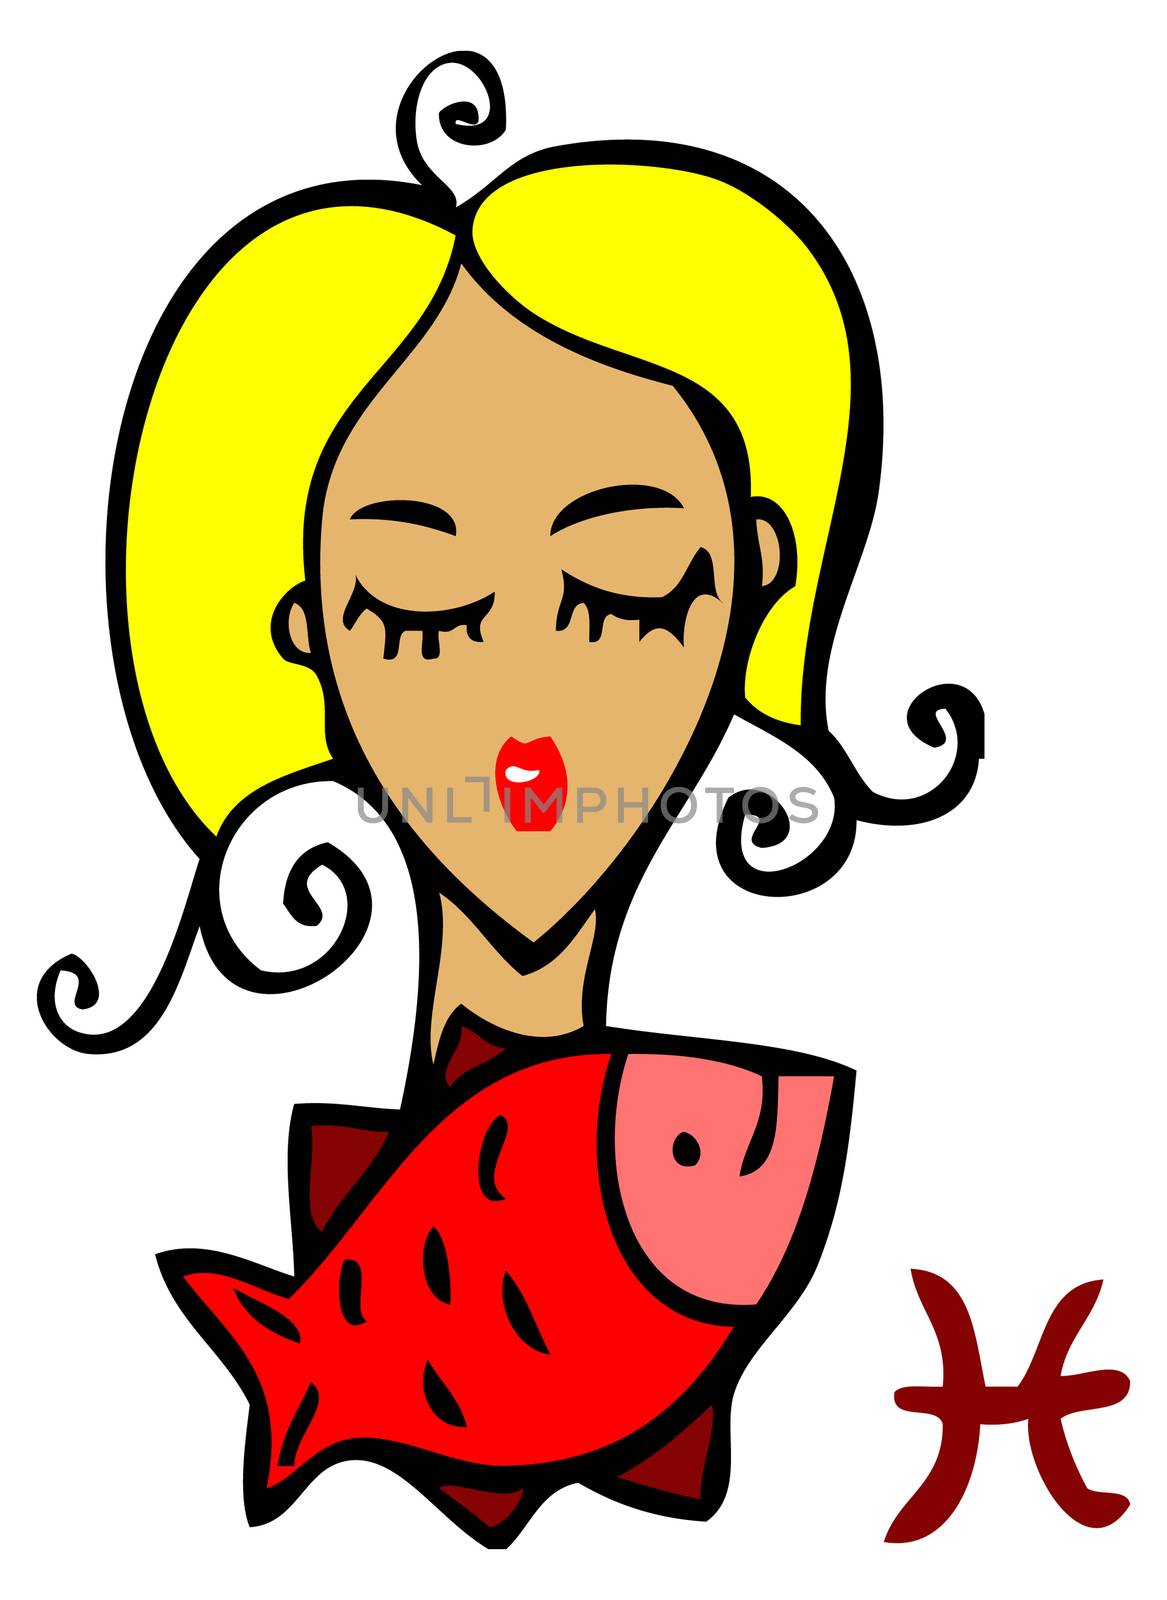 Zodiac signs, icons - pisces, Beauty Woman with fish symbol